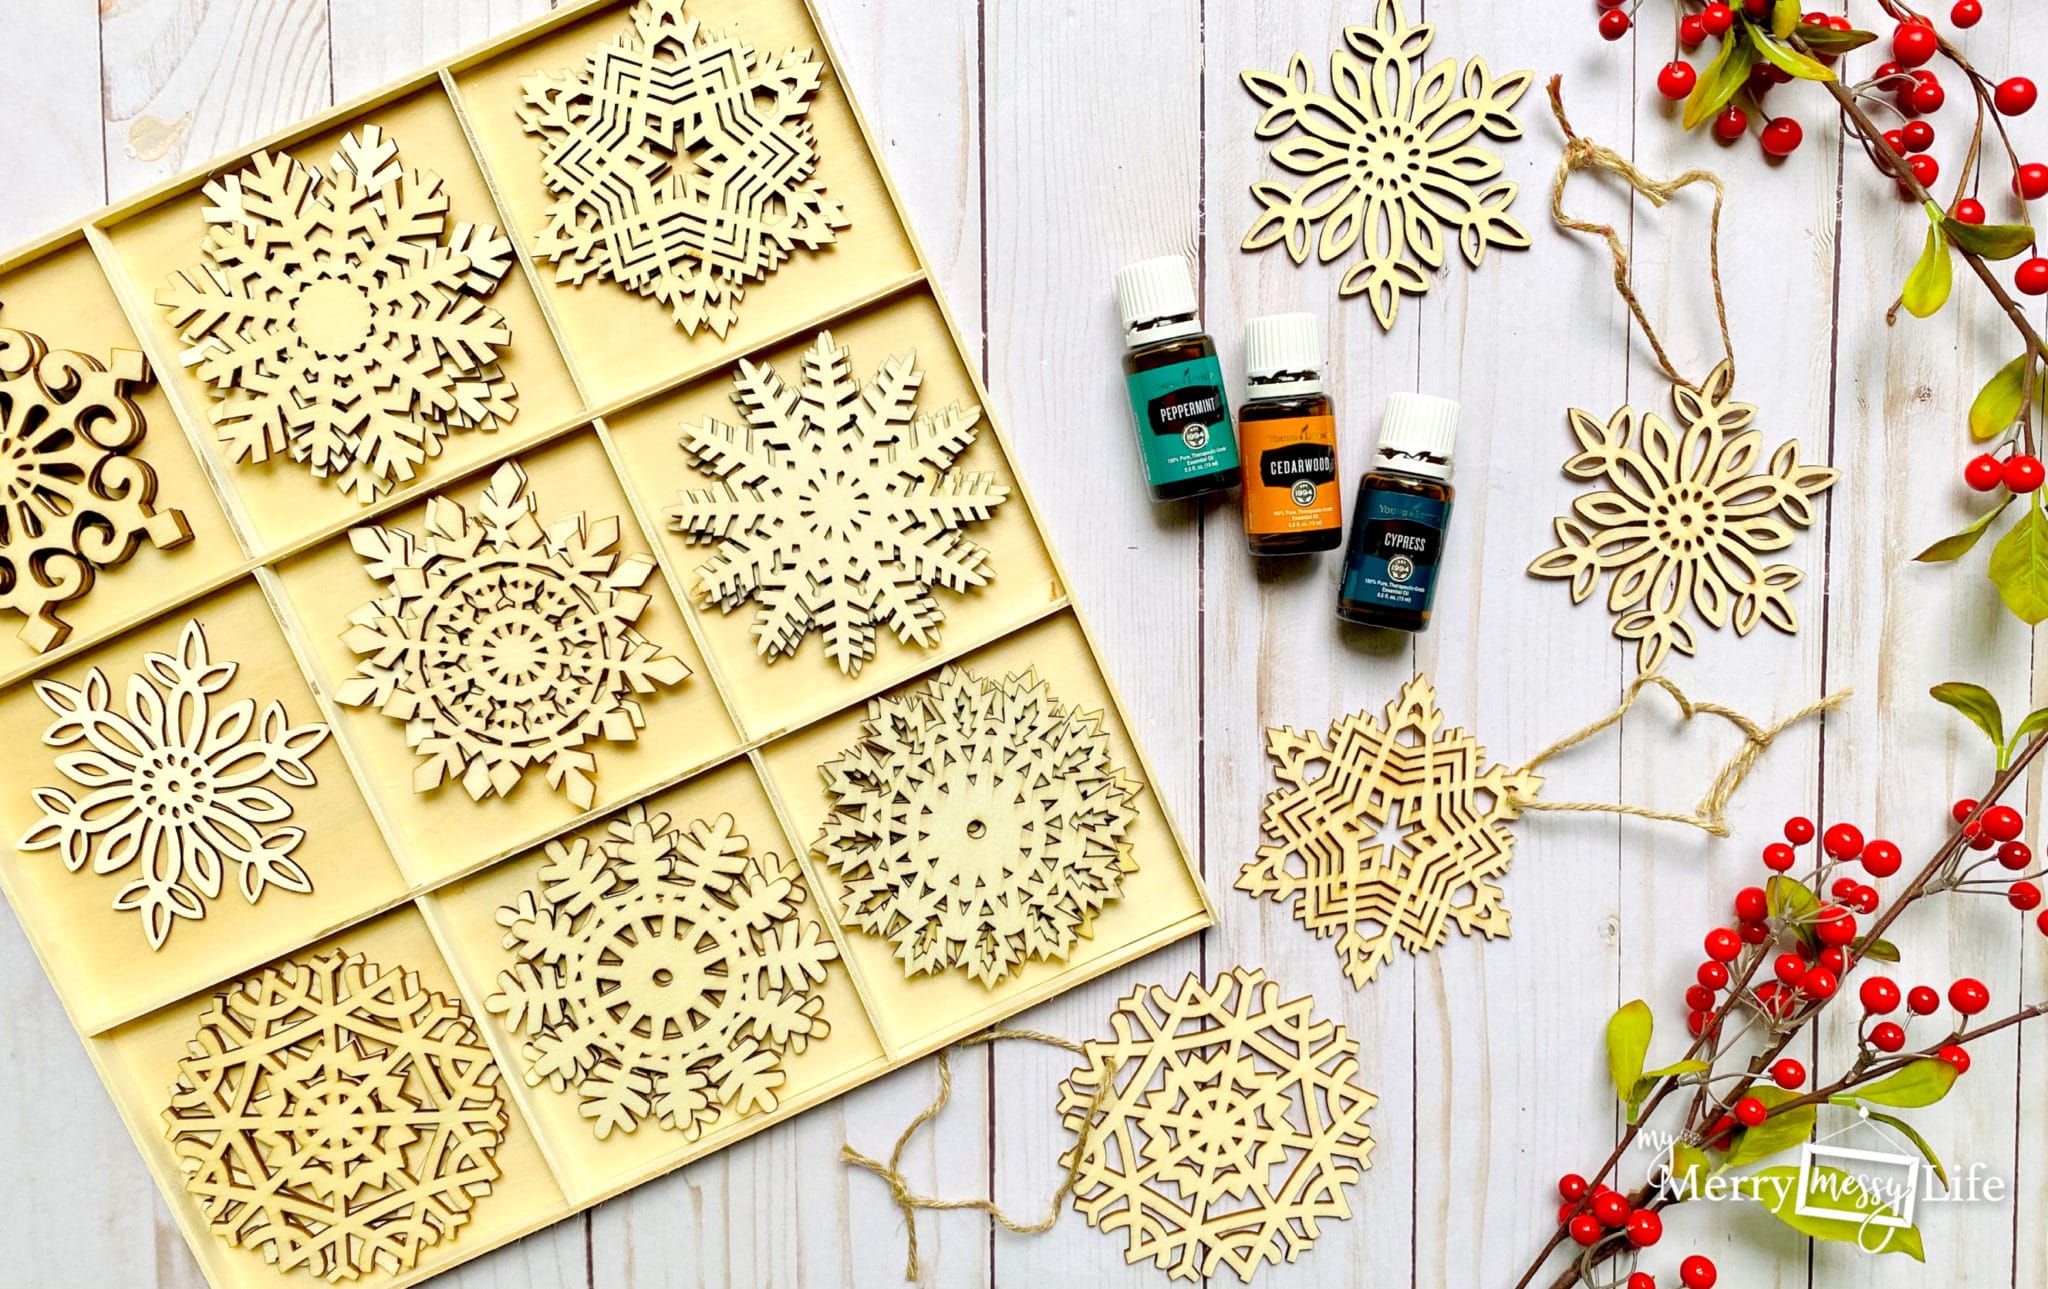 DIY Essential Oil Diffuser Ornaments - Wooden Snowflakes with Cypress, Cedarwood and Peppermint